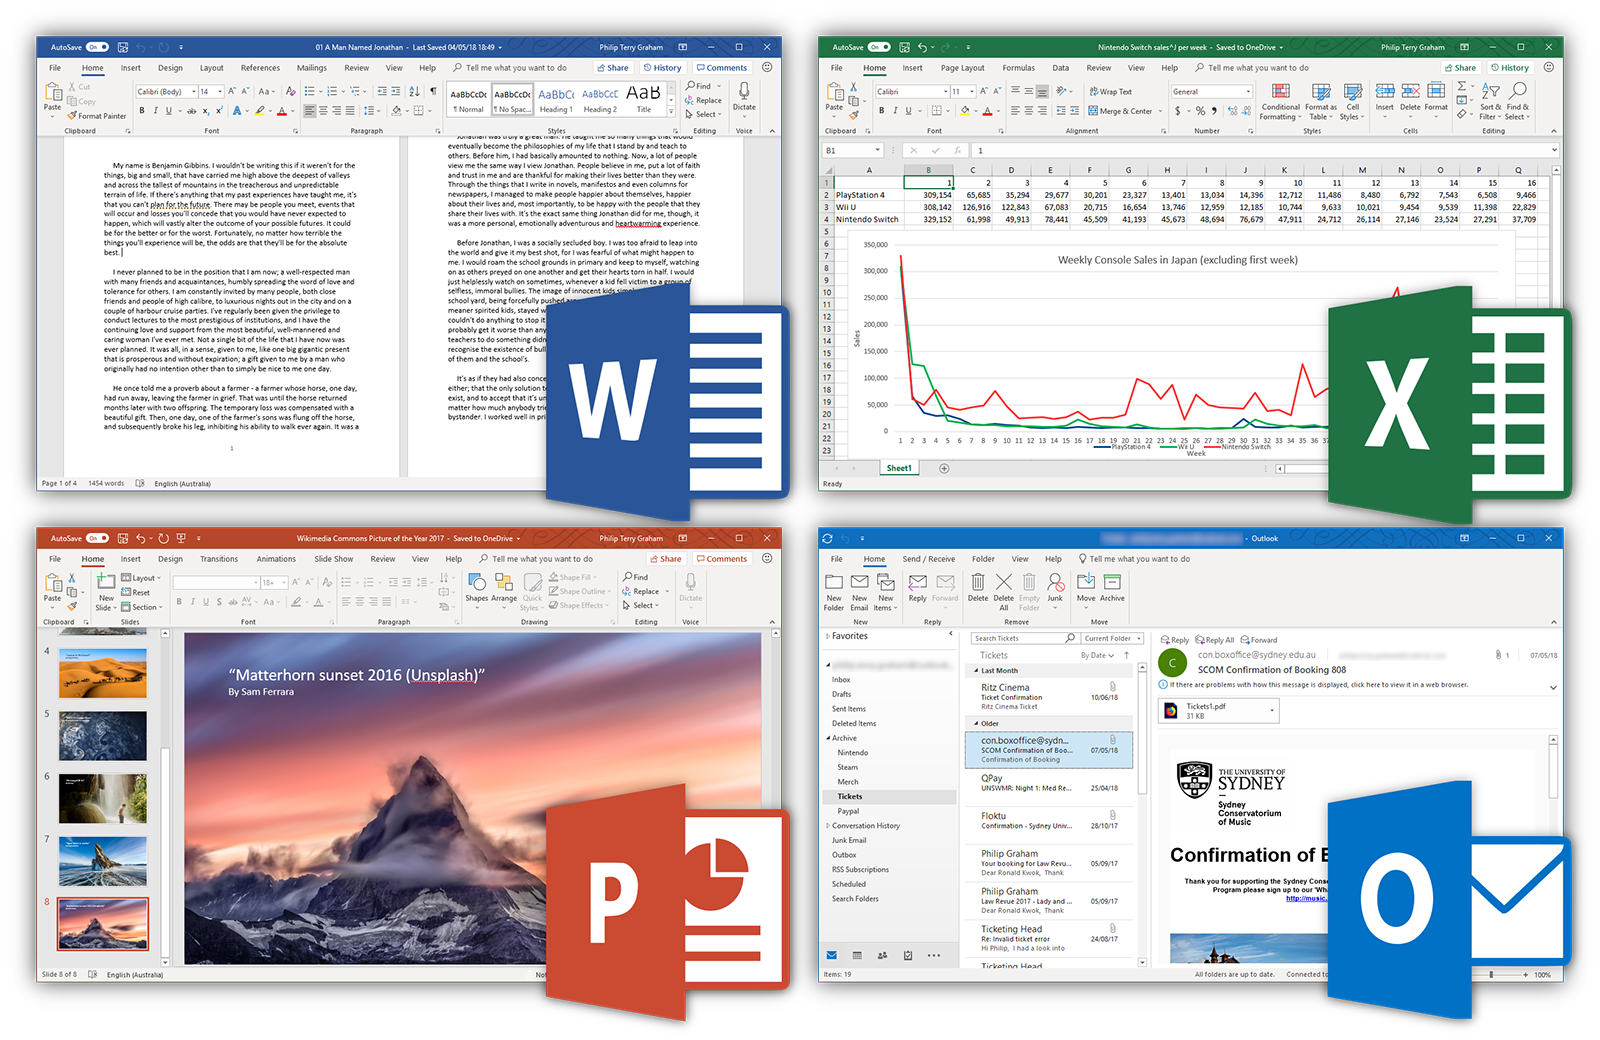 Representation of the Full Suite from Microsoft_Office as of 2019